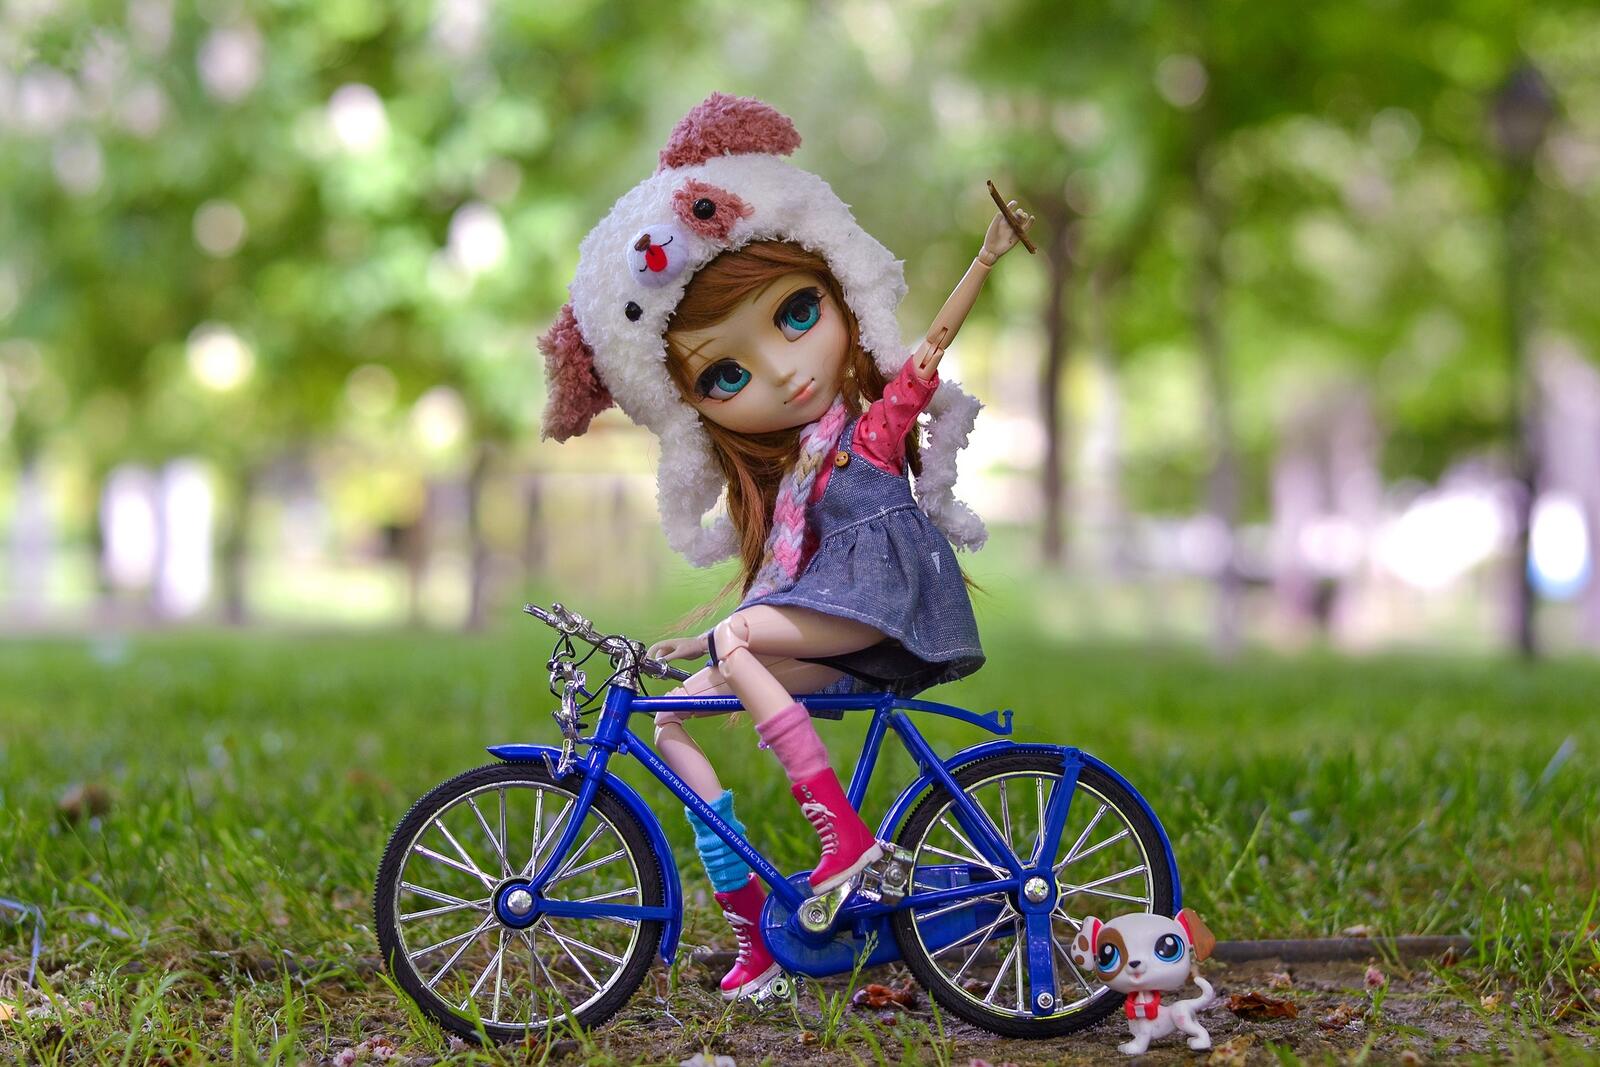 Wallpapers toy doll bike on the desktop